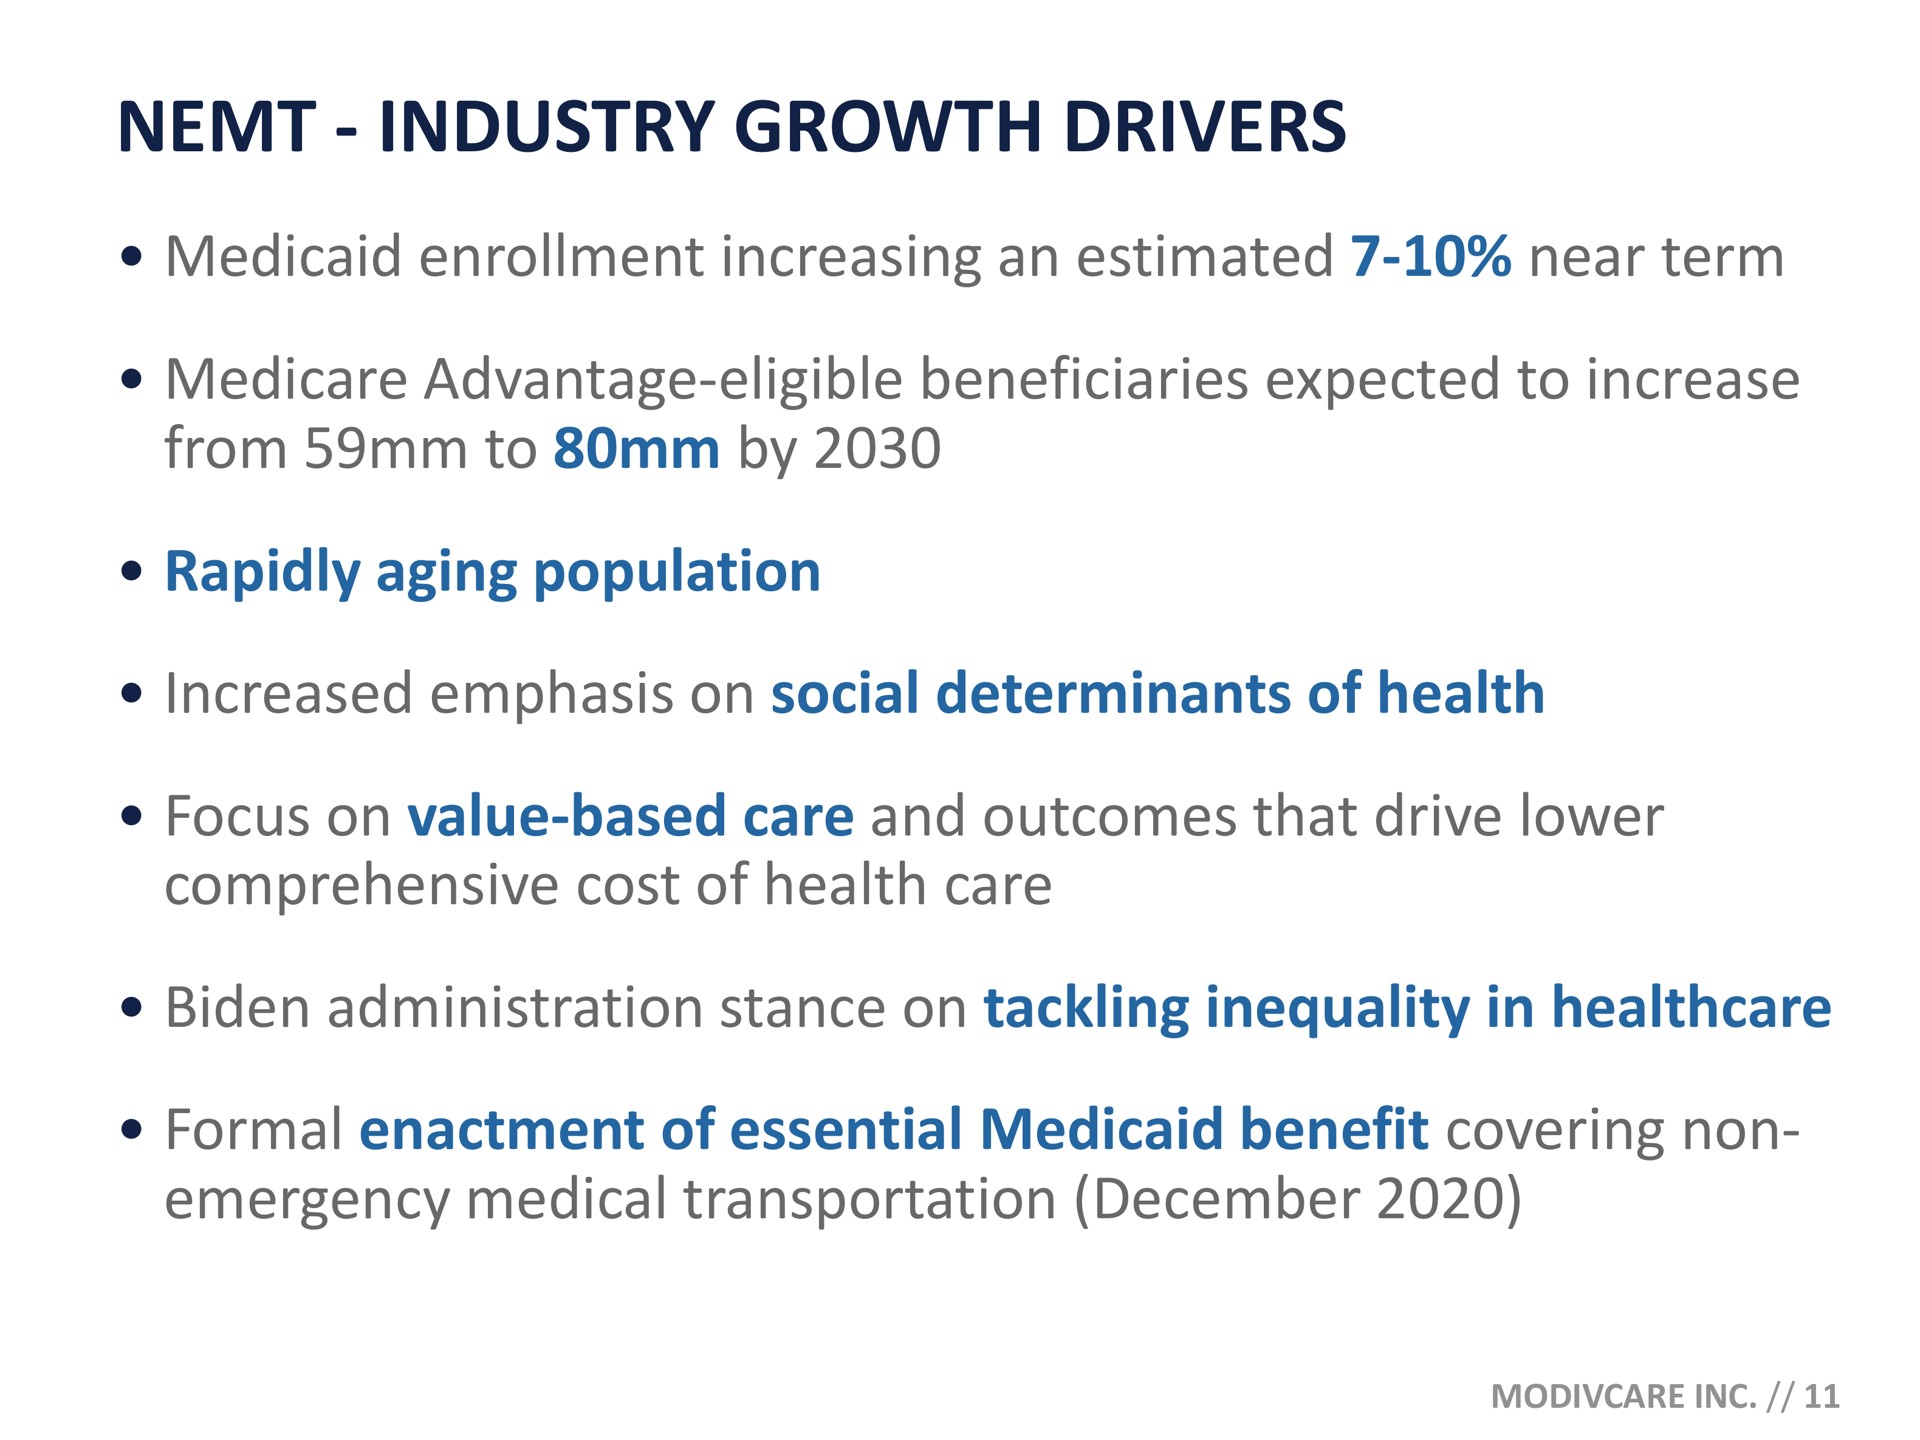 industry growth drivers | ModivCare